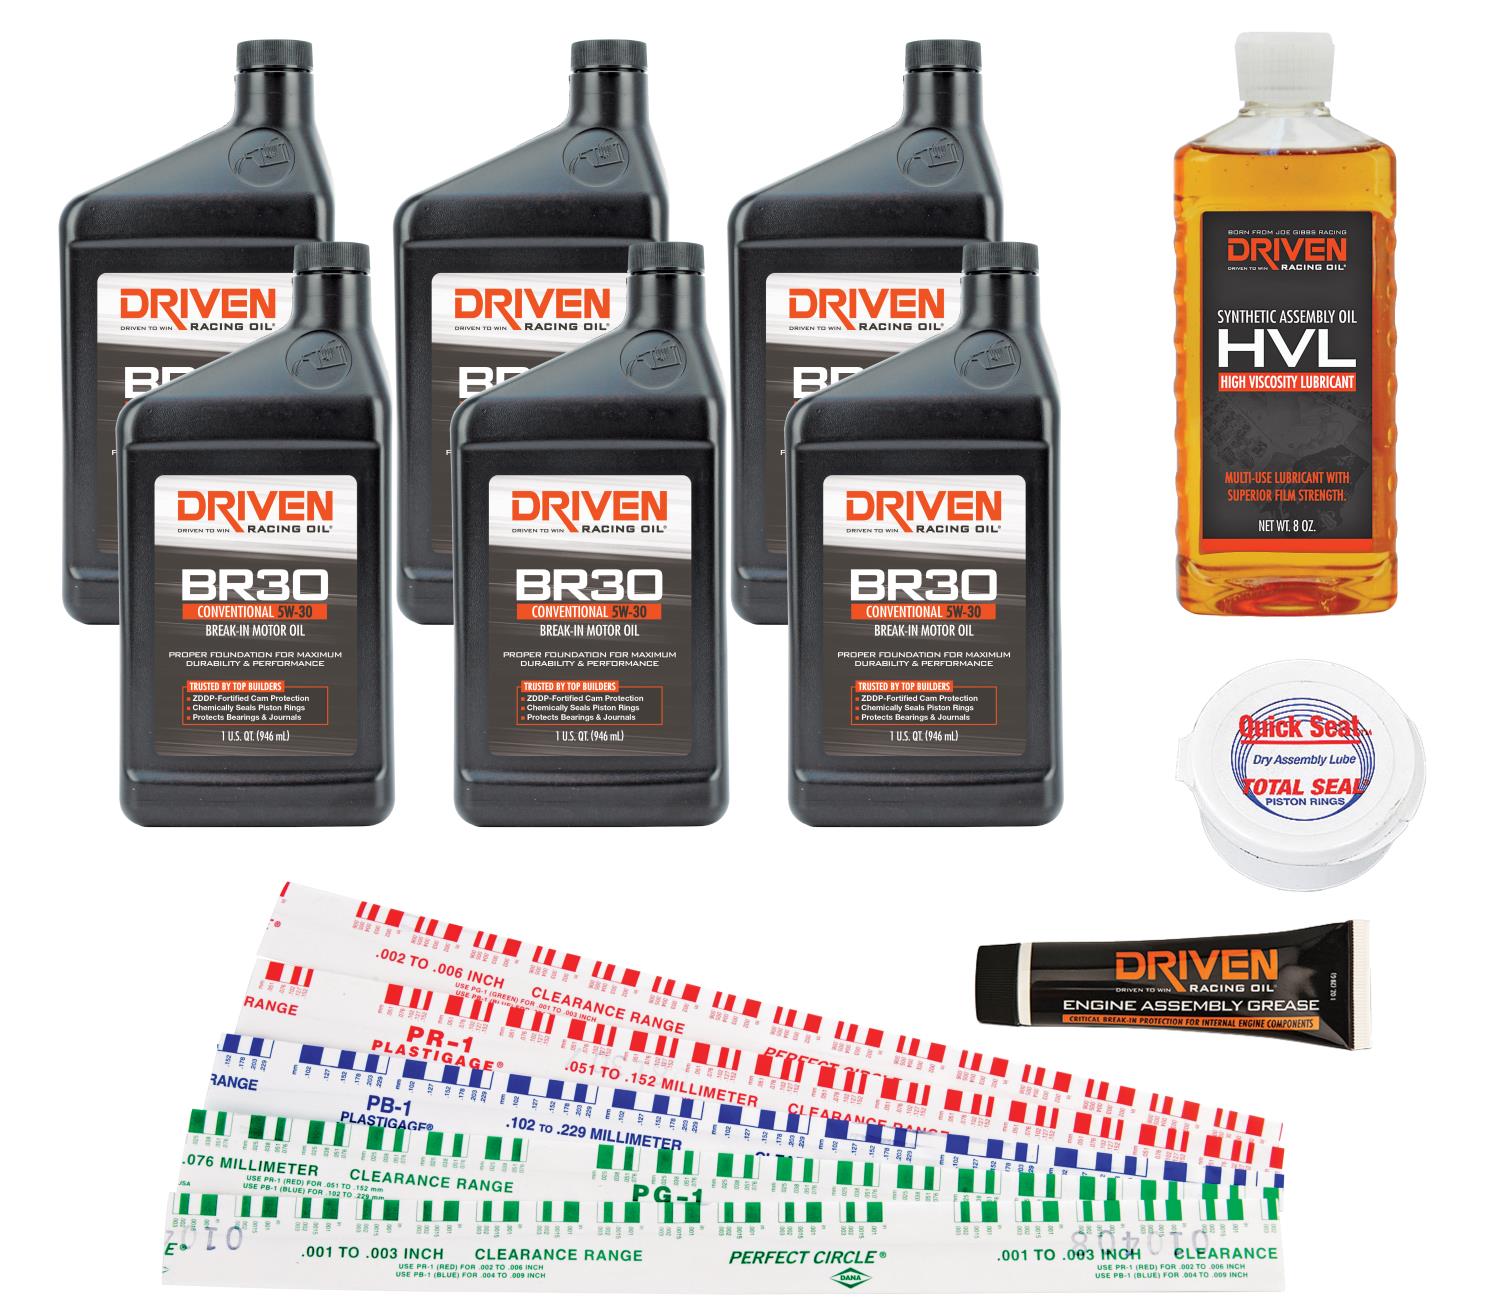 Engine Assembly Lubrication Kit PLUS Includes: (6) Driven BR30 Break-In Oil